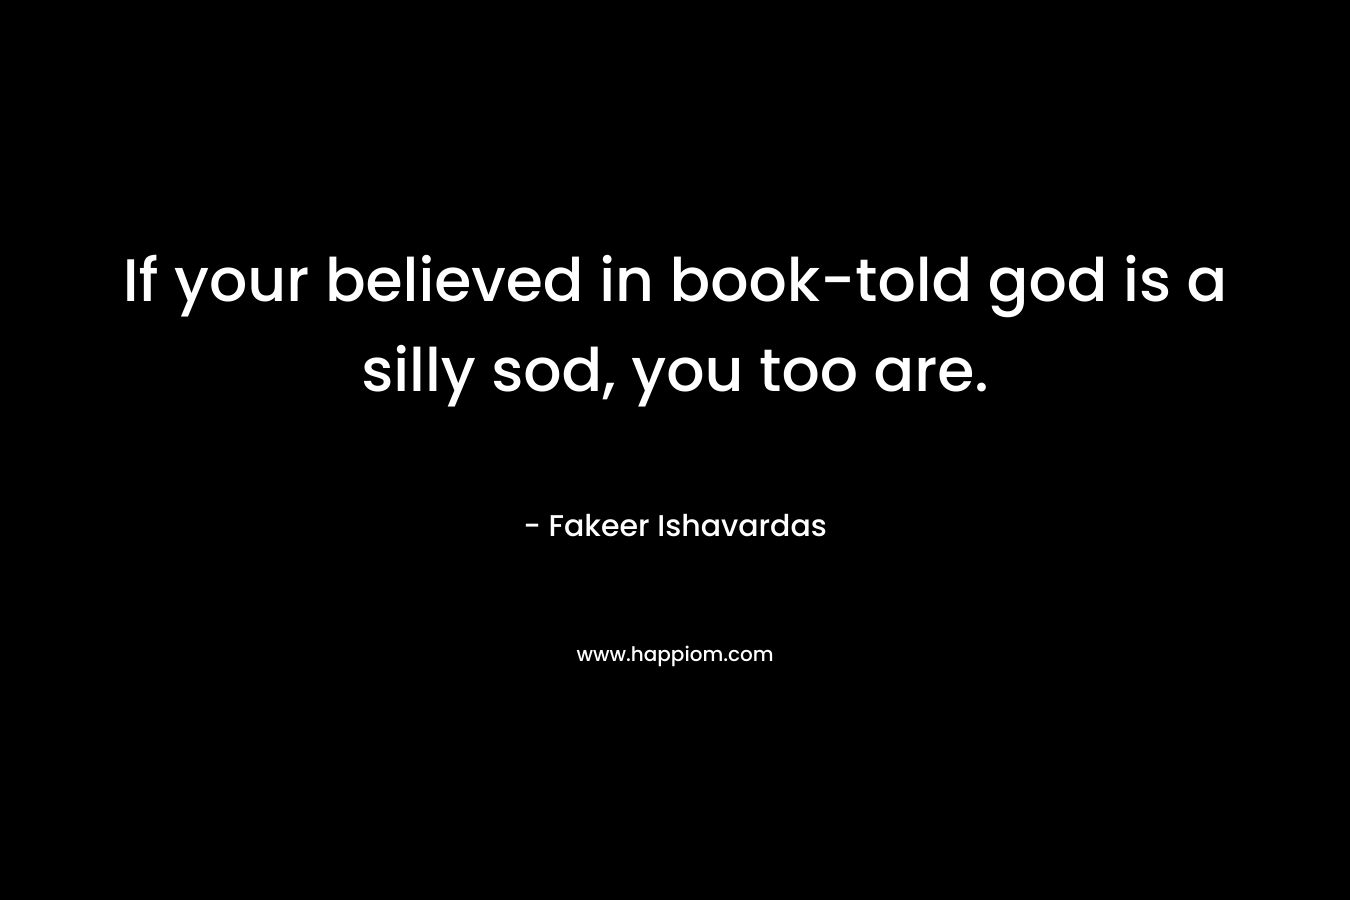 If your believed in book-told god is a silly sod, you too are.